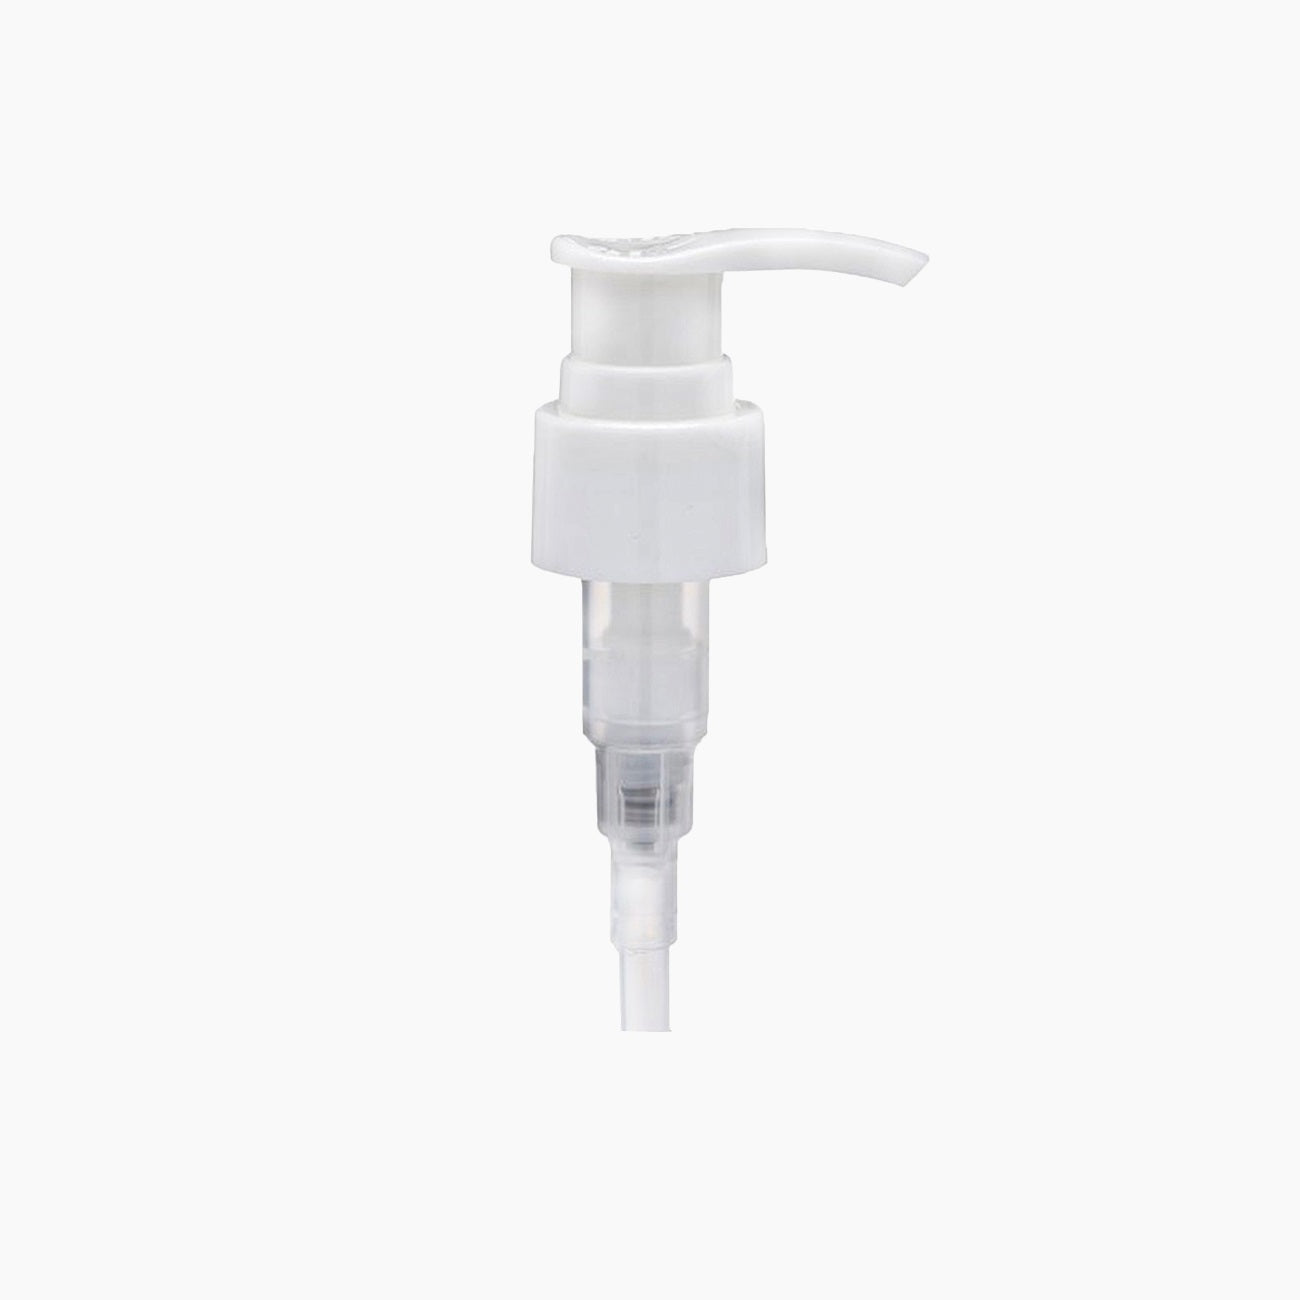 24mm White Plastic Lotion Pump Cap On White Background | Brightpack Closures And Accessories